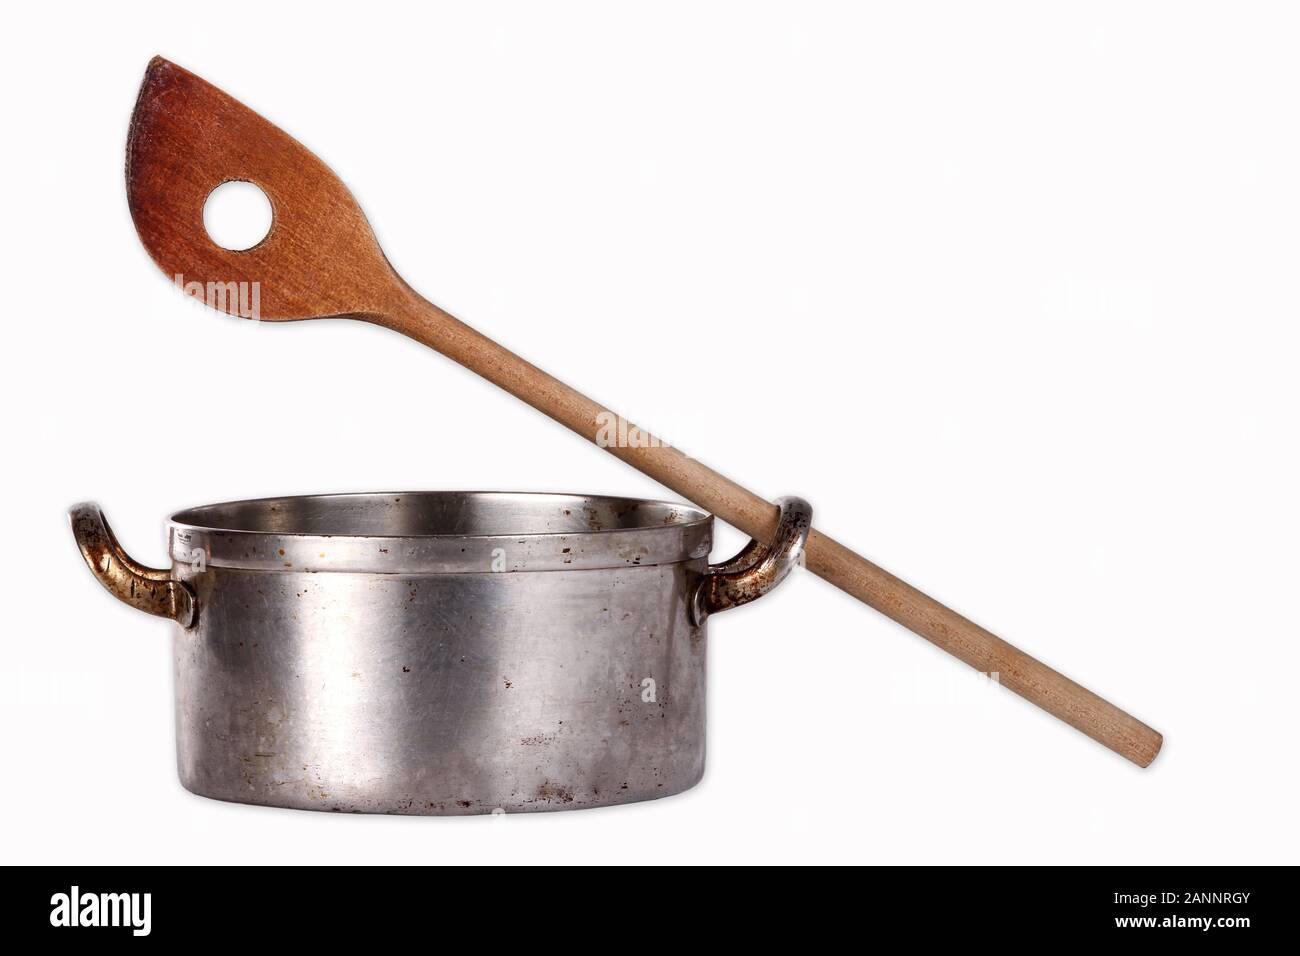 Cooking pot with wooden spoon with hole Stock Photo